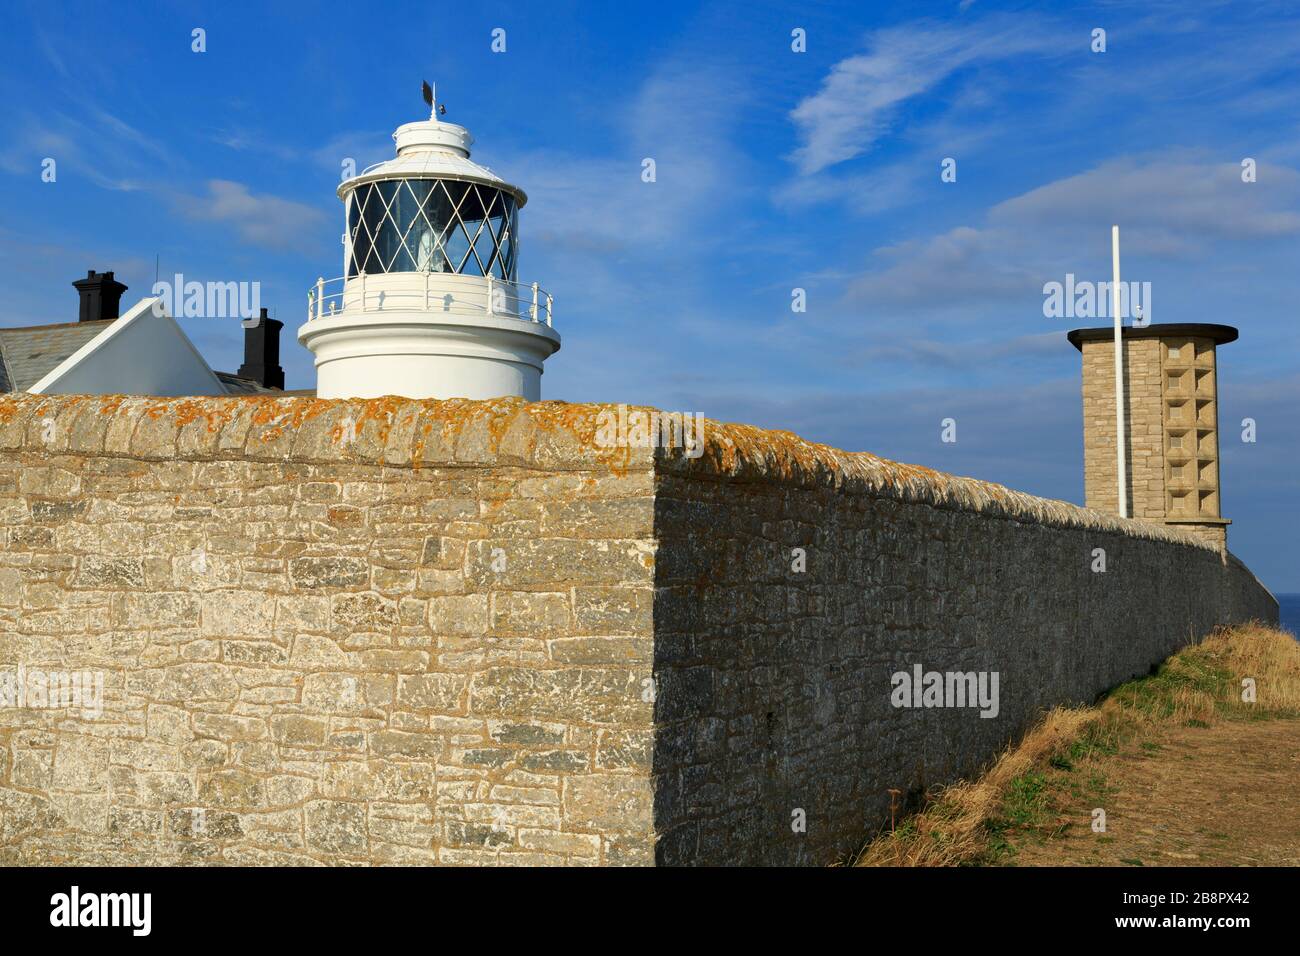 Incudine Point Lighthouse, Durlston Country Park, Swanage Town, Isle of Purbeck, Dorset, England, Regno Unito Foto Stock